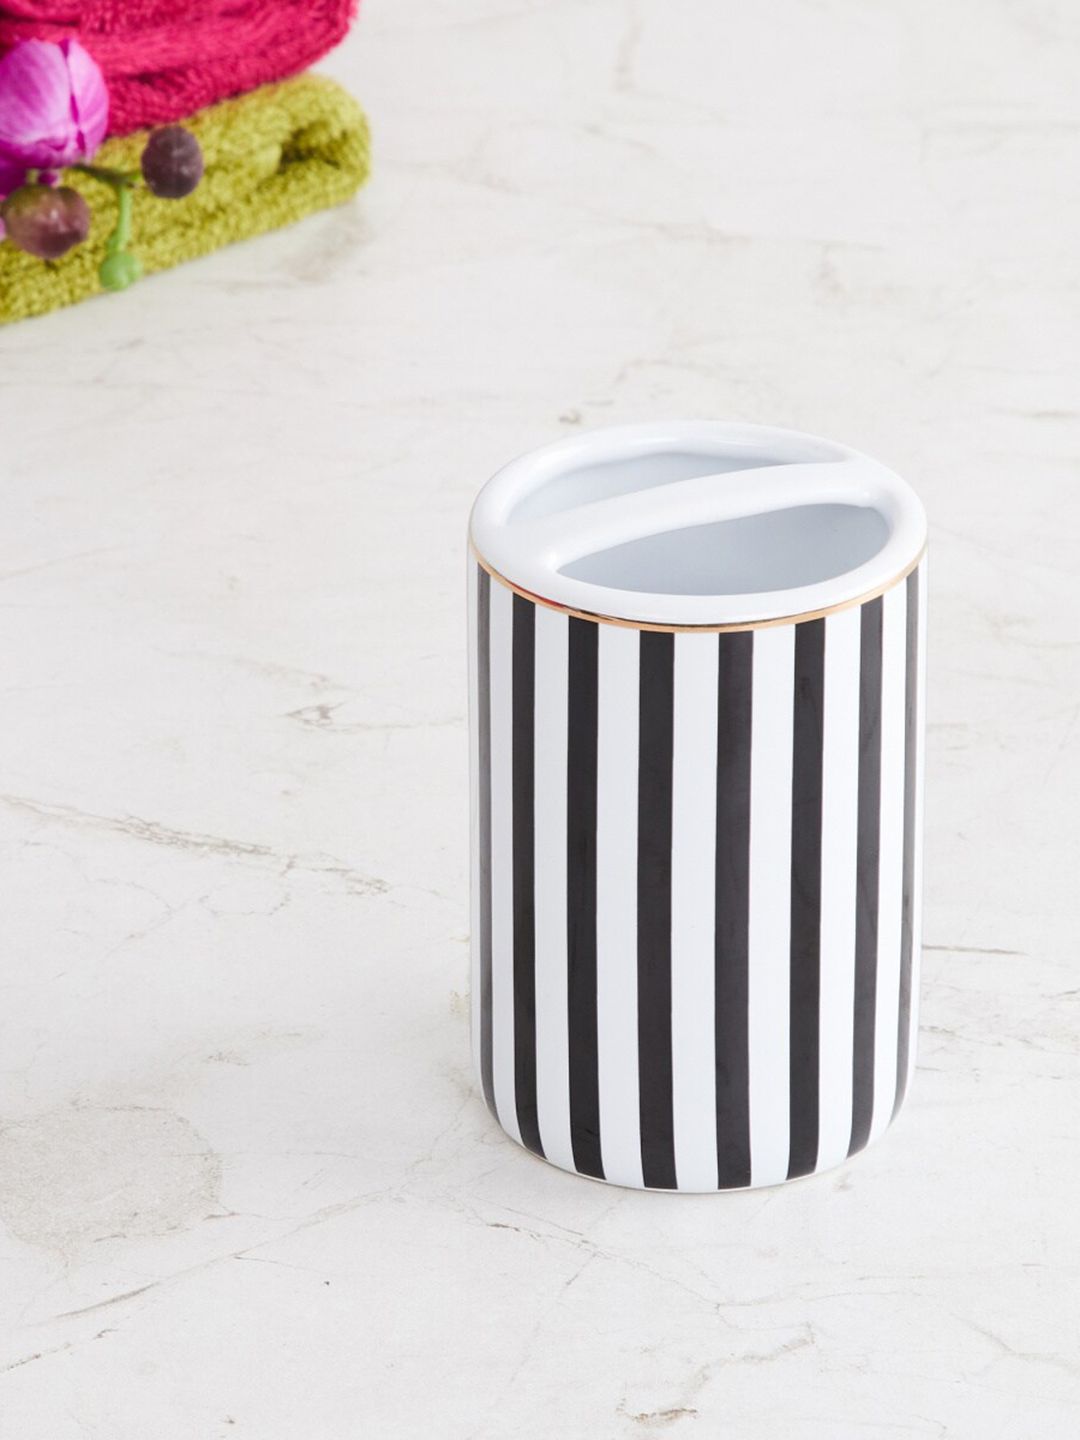 Home Centre Black And White Ceramic Toothbrush Holder Price in India